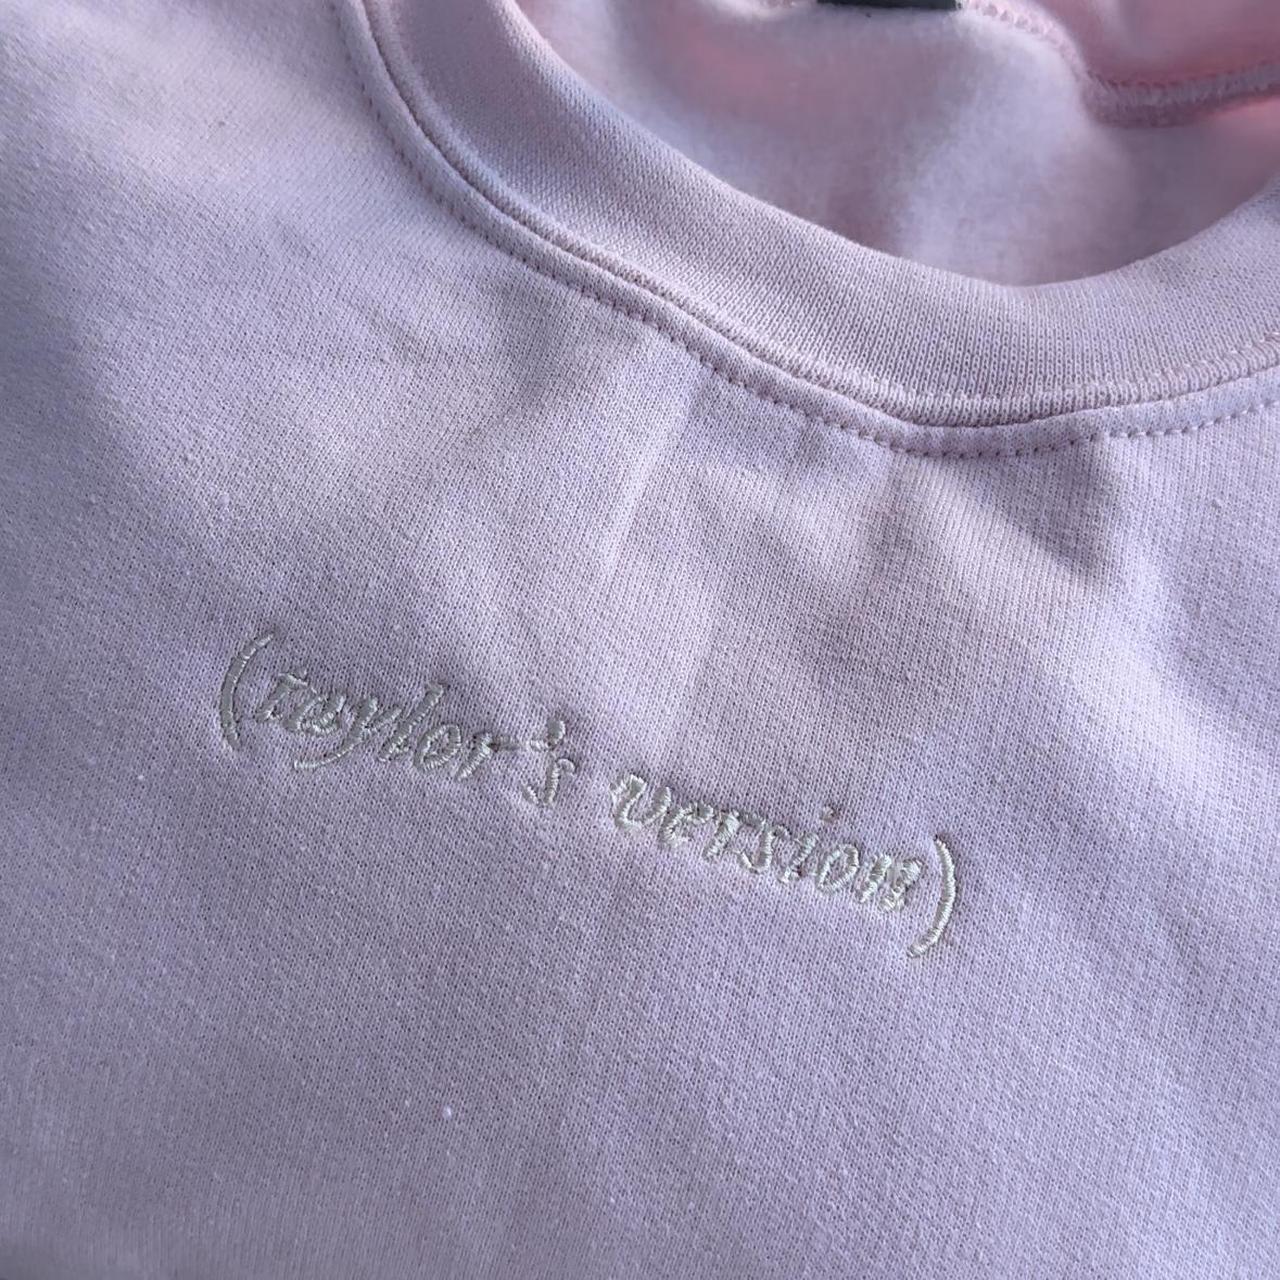 DISCOUNTED ITEM Taylor’s version embroidered... - Depop